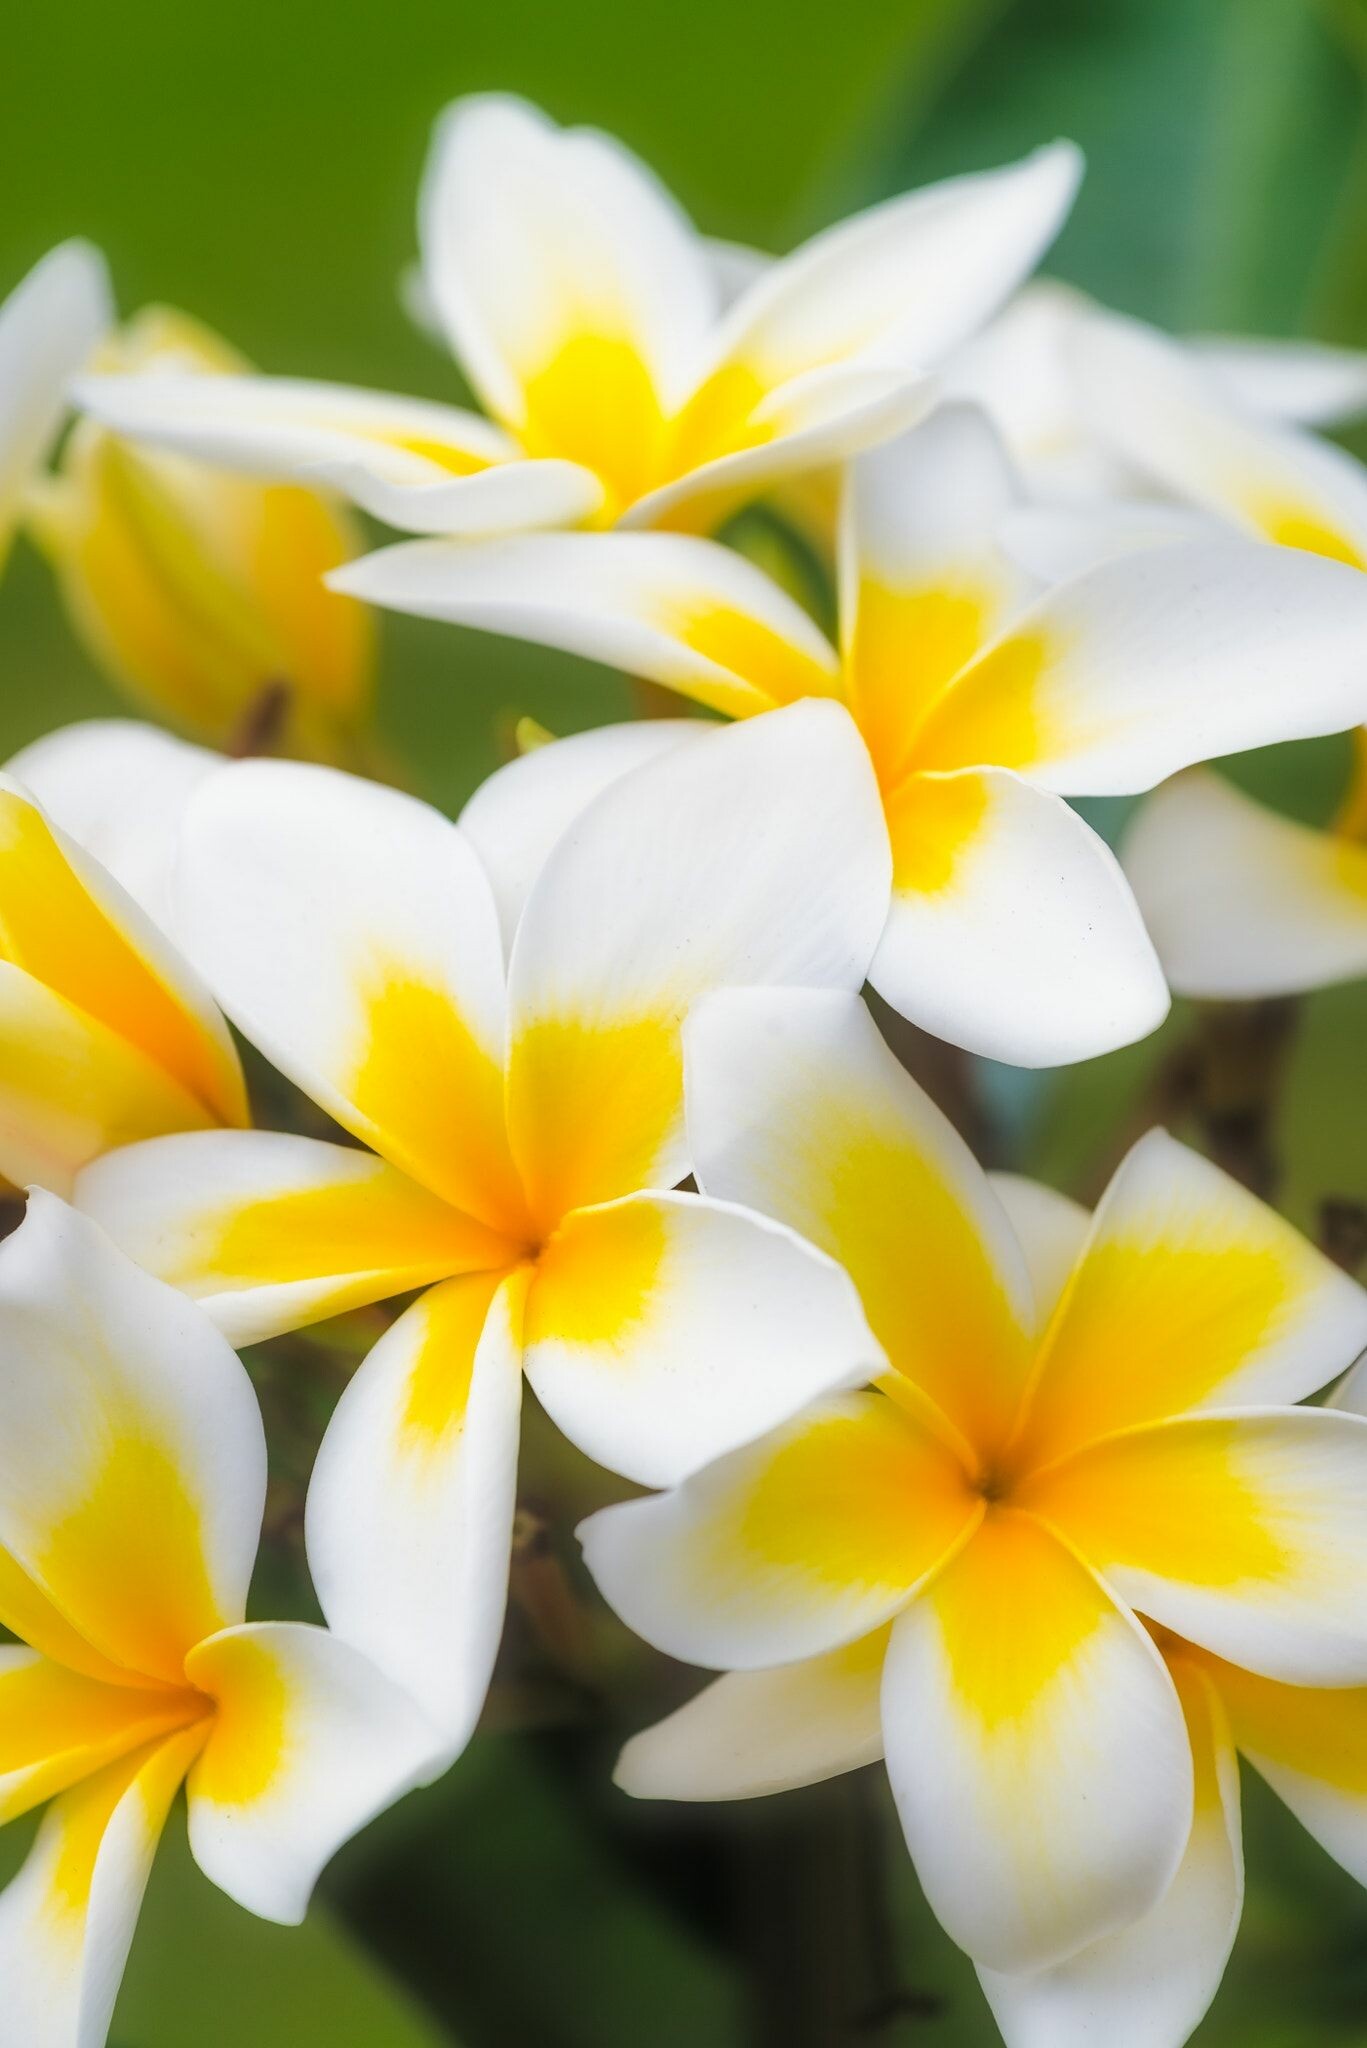 Frangipani Flower: Flowers appear in clusters at the end of branches and have a very distinctive fragrance. 1370x2050 HD Wallpaper.